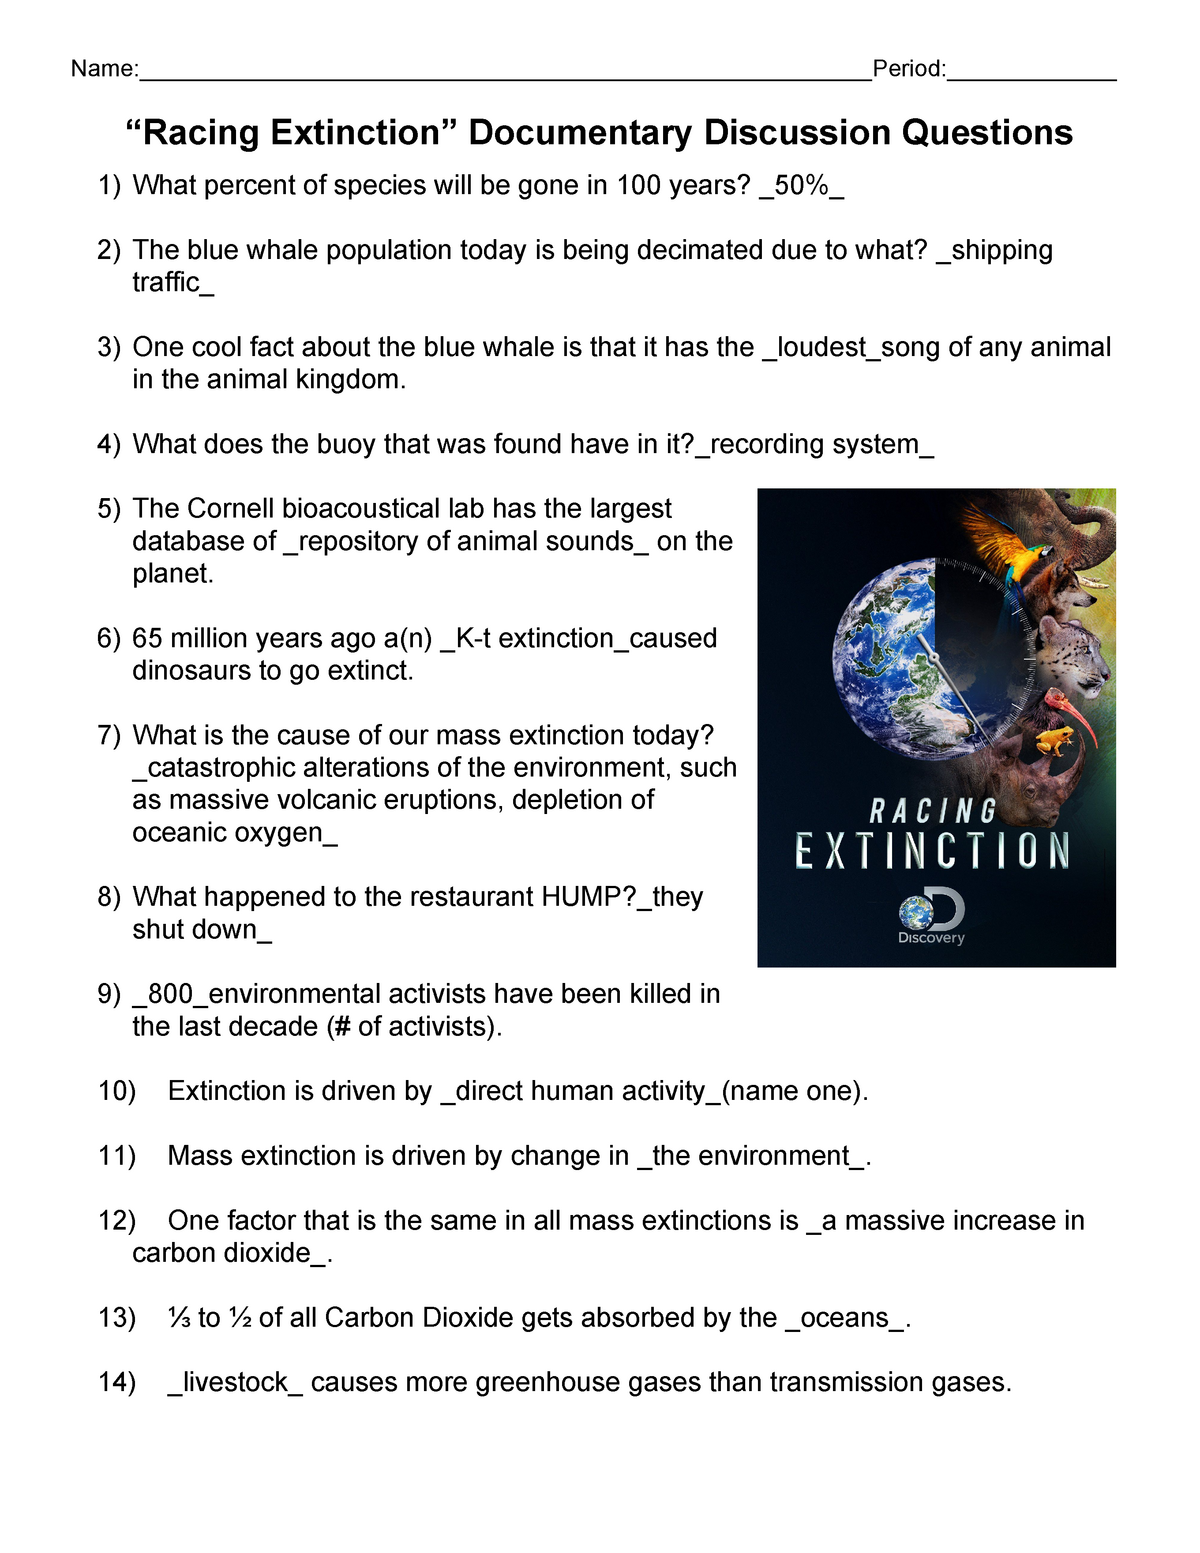 Copy of Racing Extinction Questions for Documentary Studocu